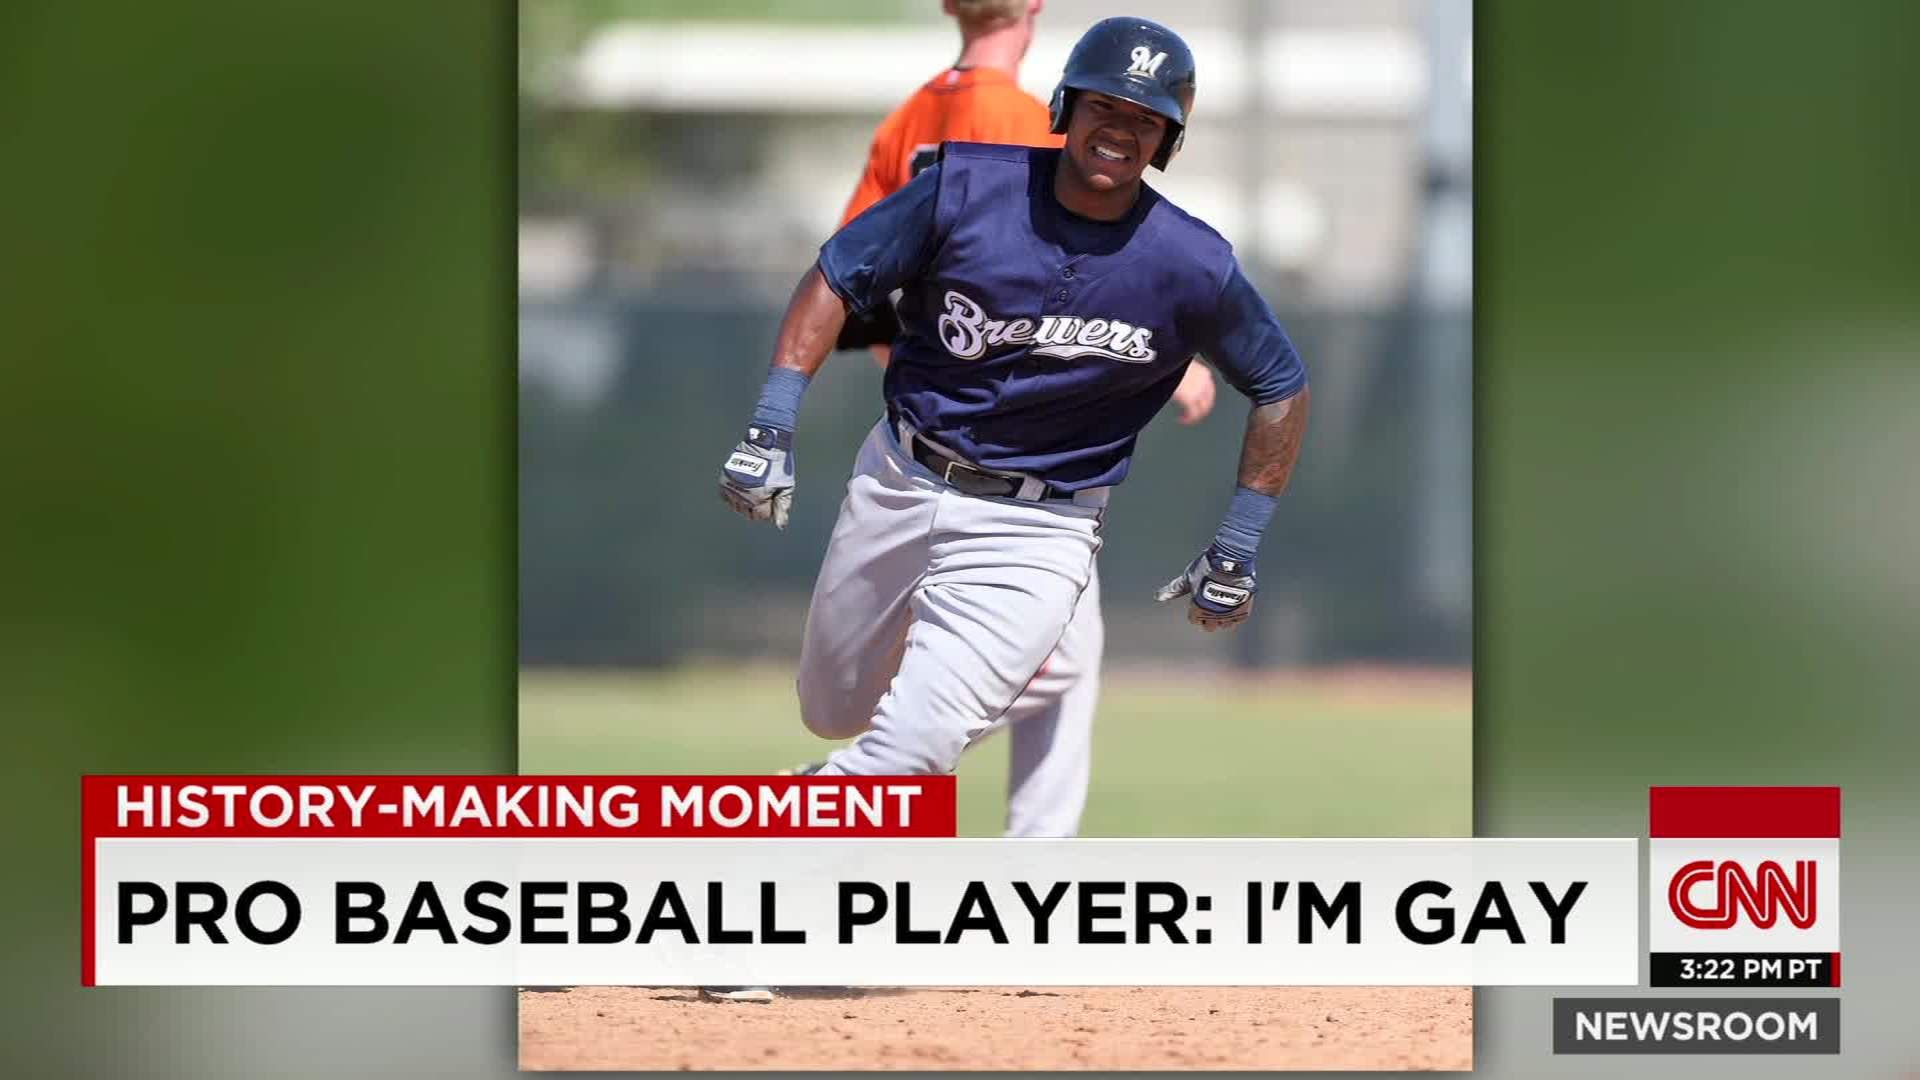 Denson is the first openly gay baseball player | CNN